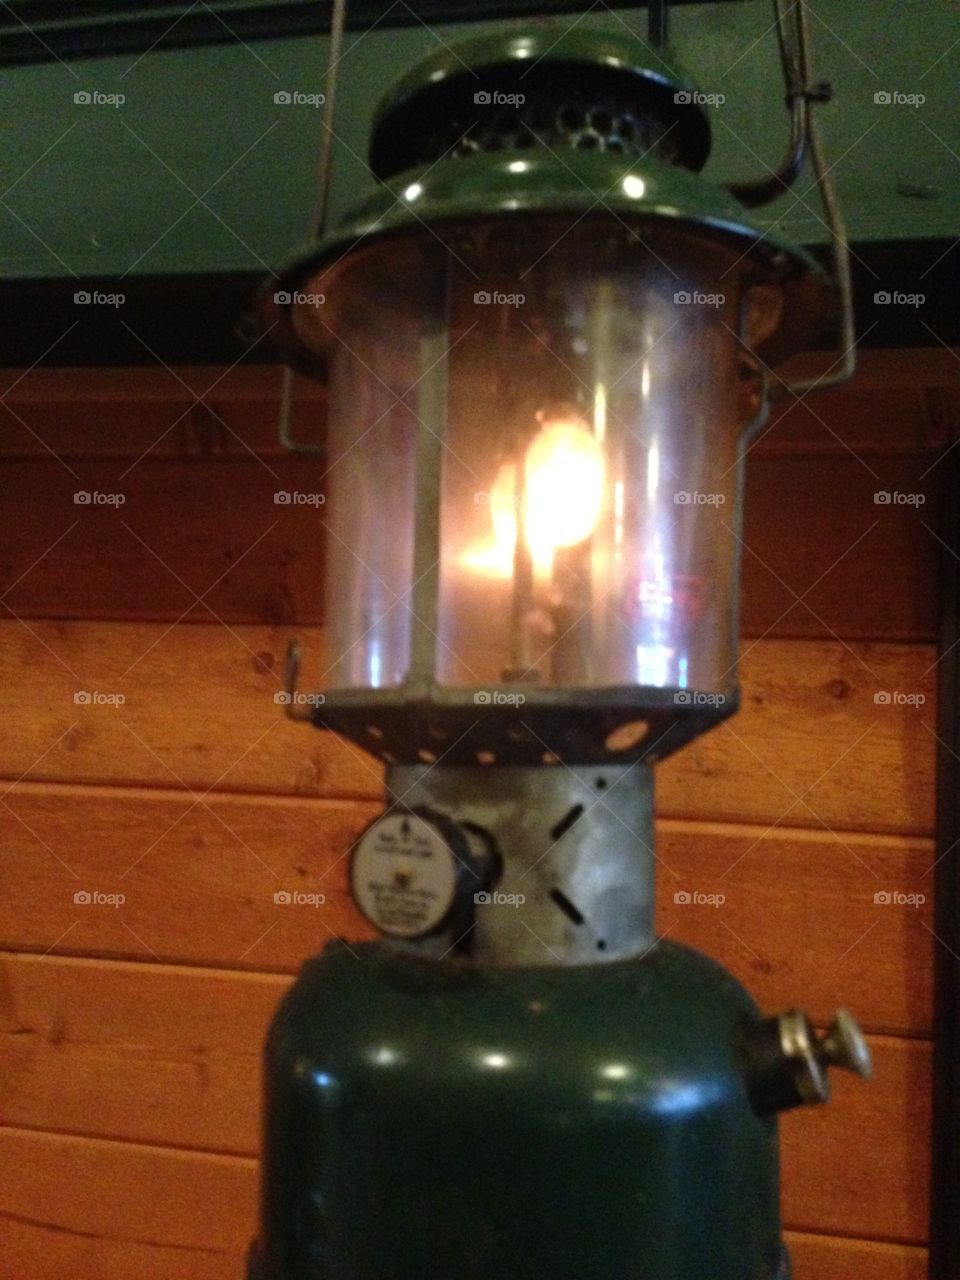 Look, it's an old, back in the day camping lantern on a table.